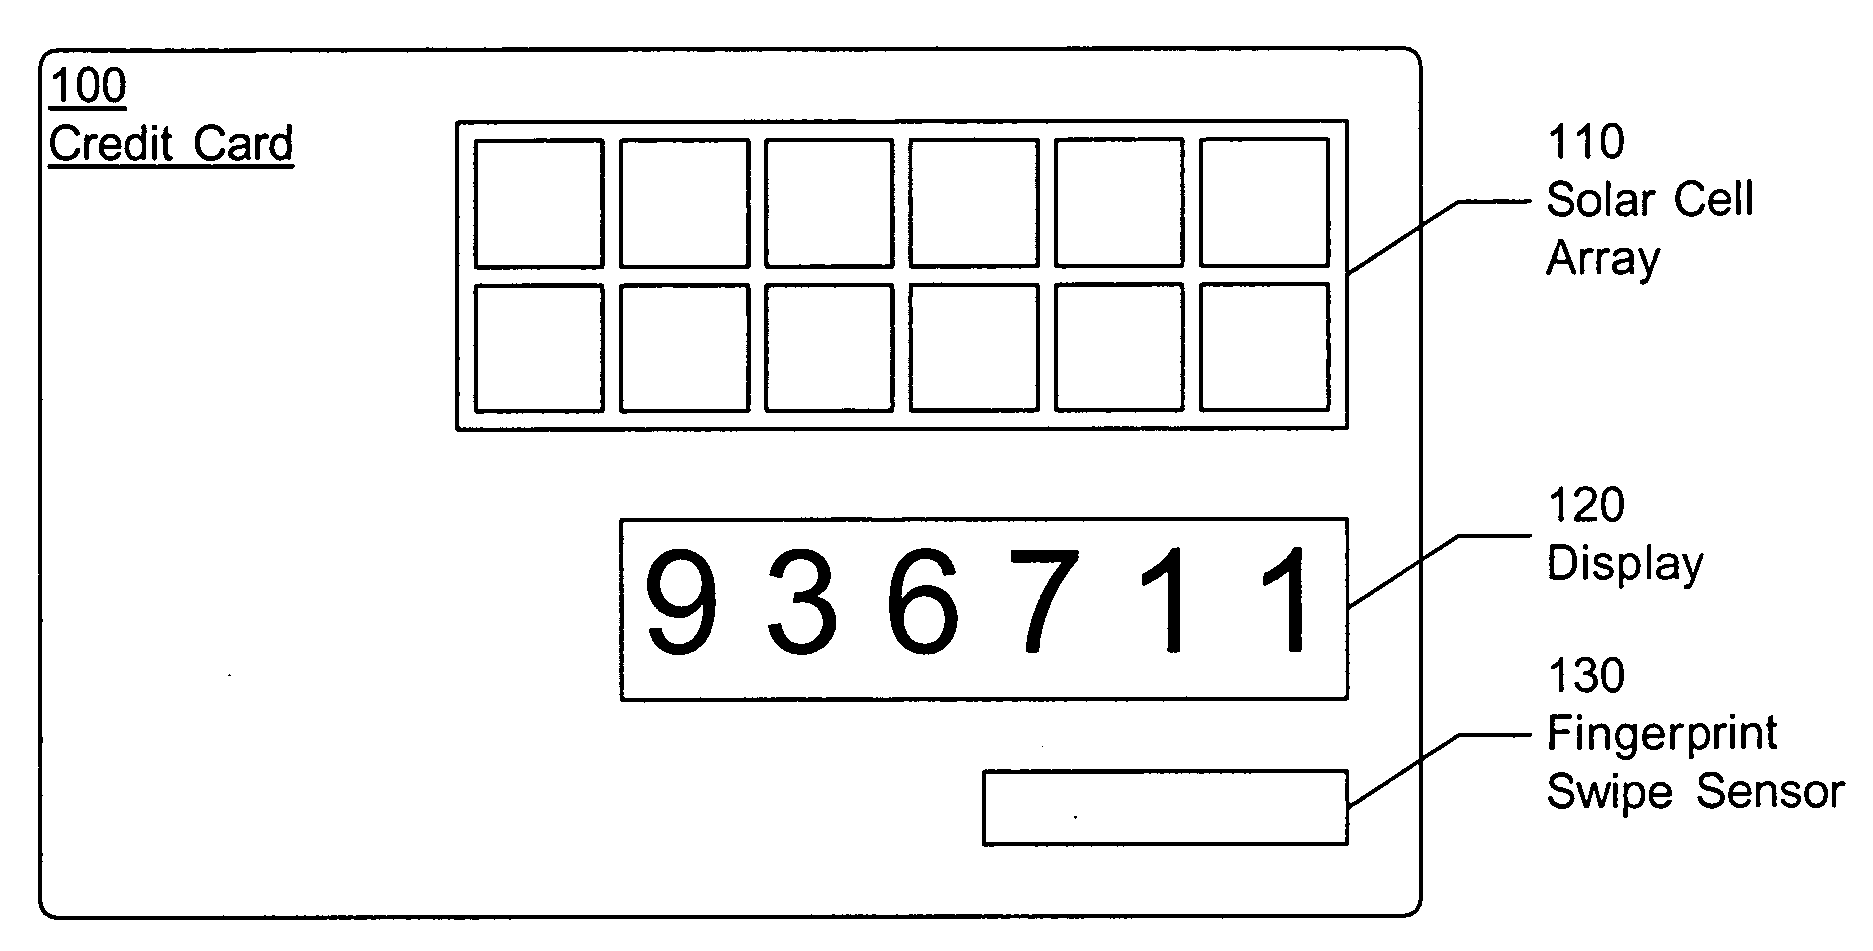 Multi-function solar cell in authentication token